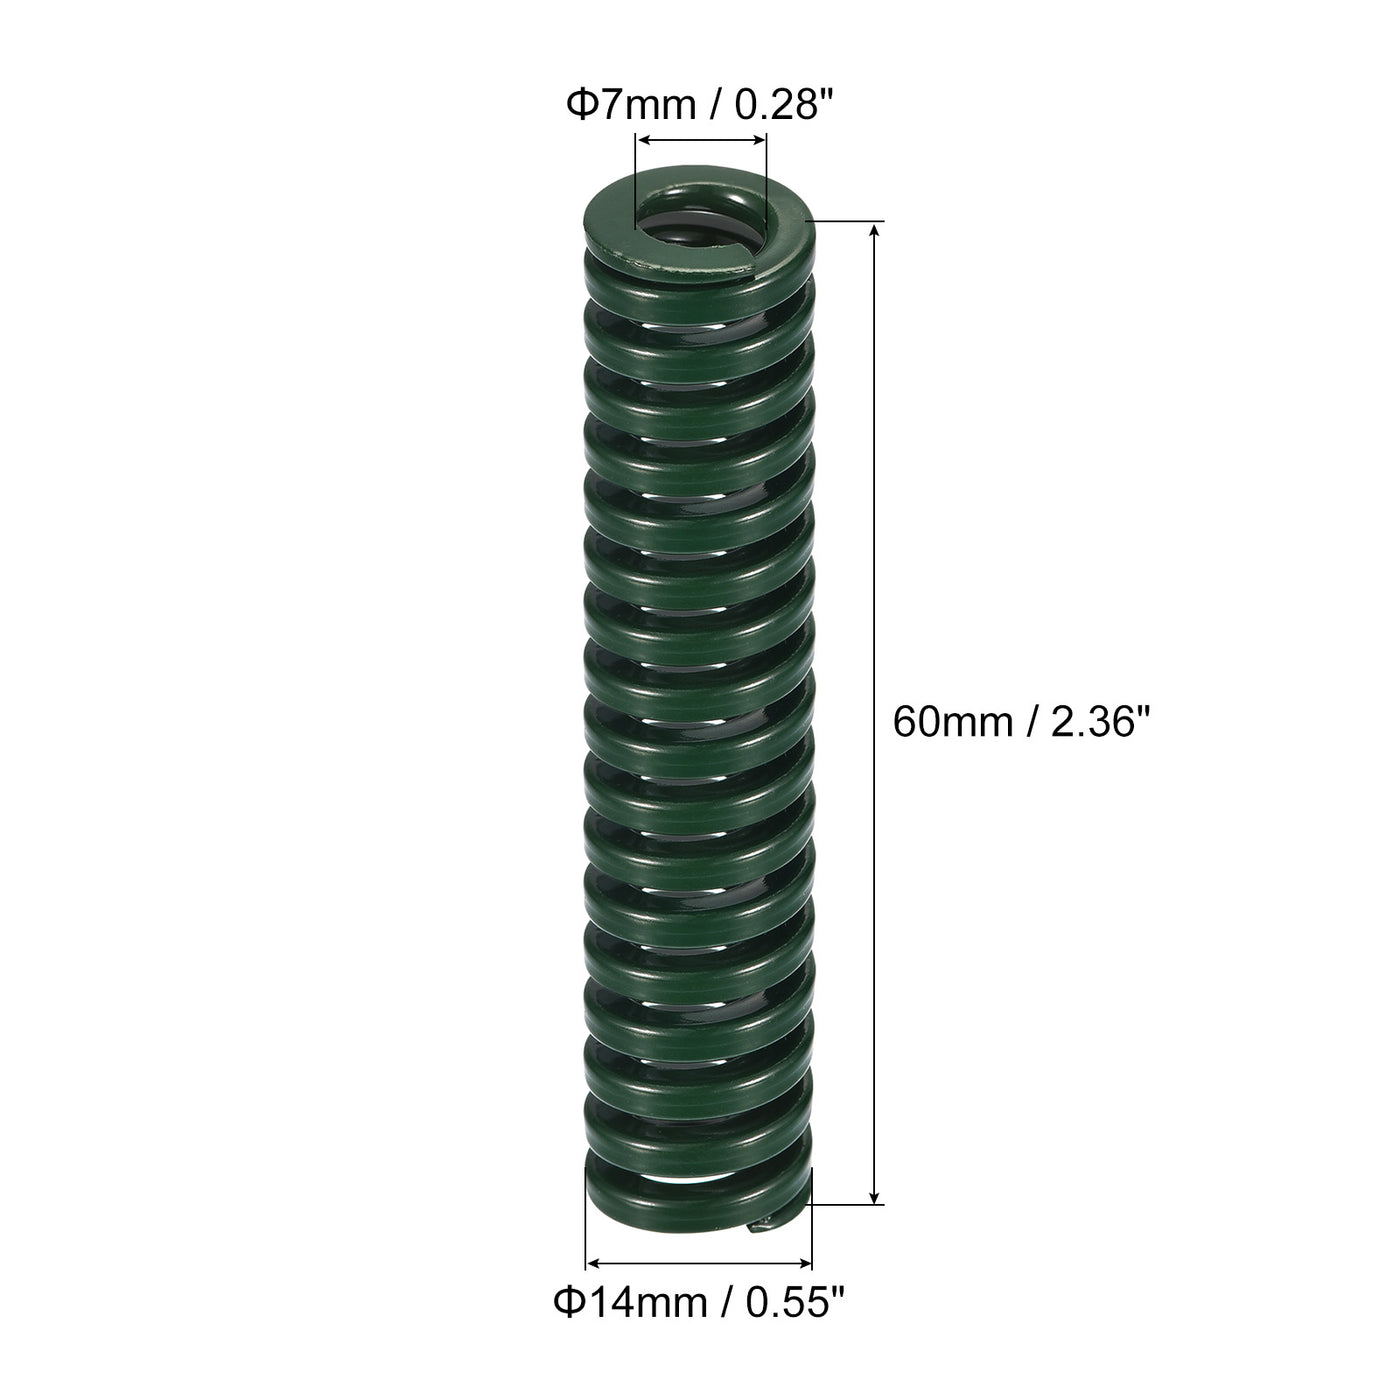 uxcell Uxcell 3D Printer Die Spring, 2pcs 14mm OD 60mm Long Spiral Stamping Compression Green